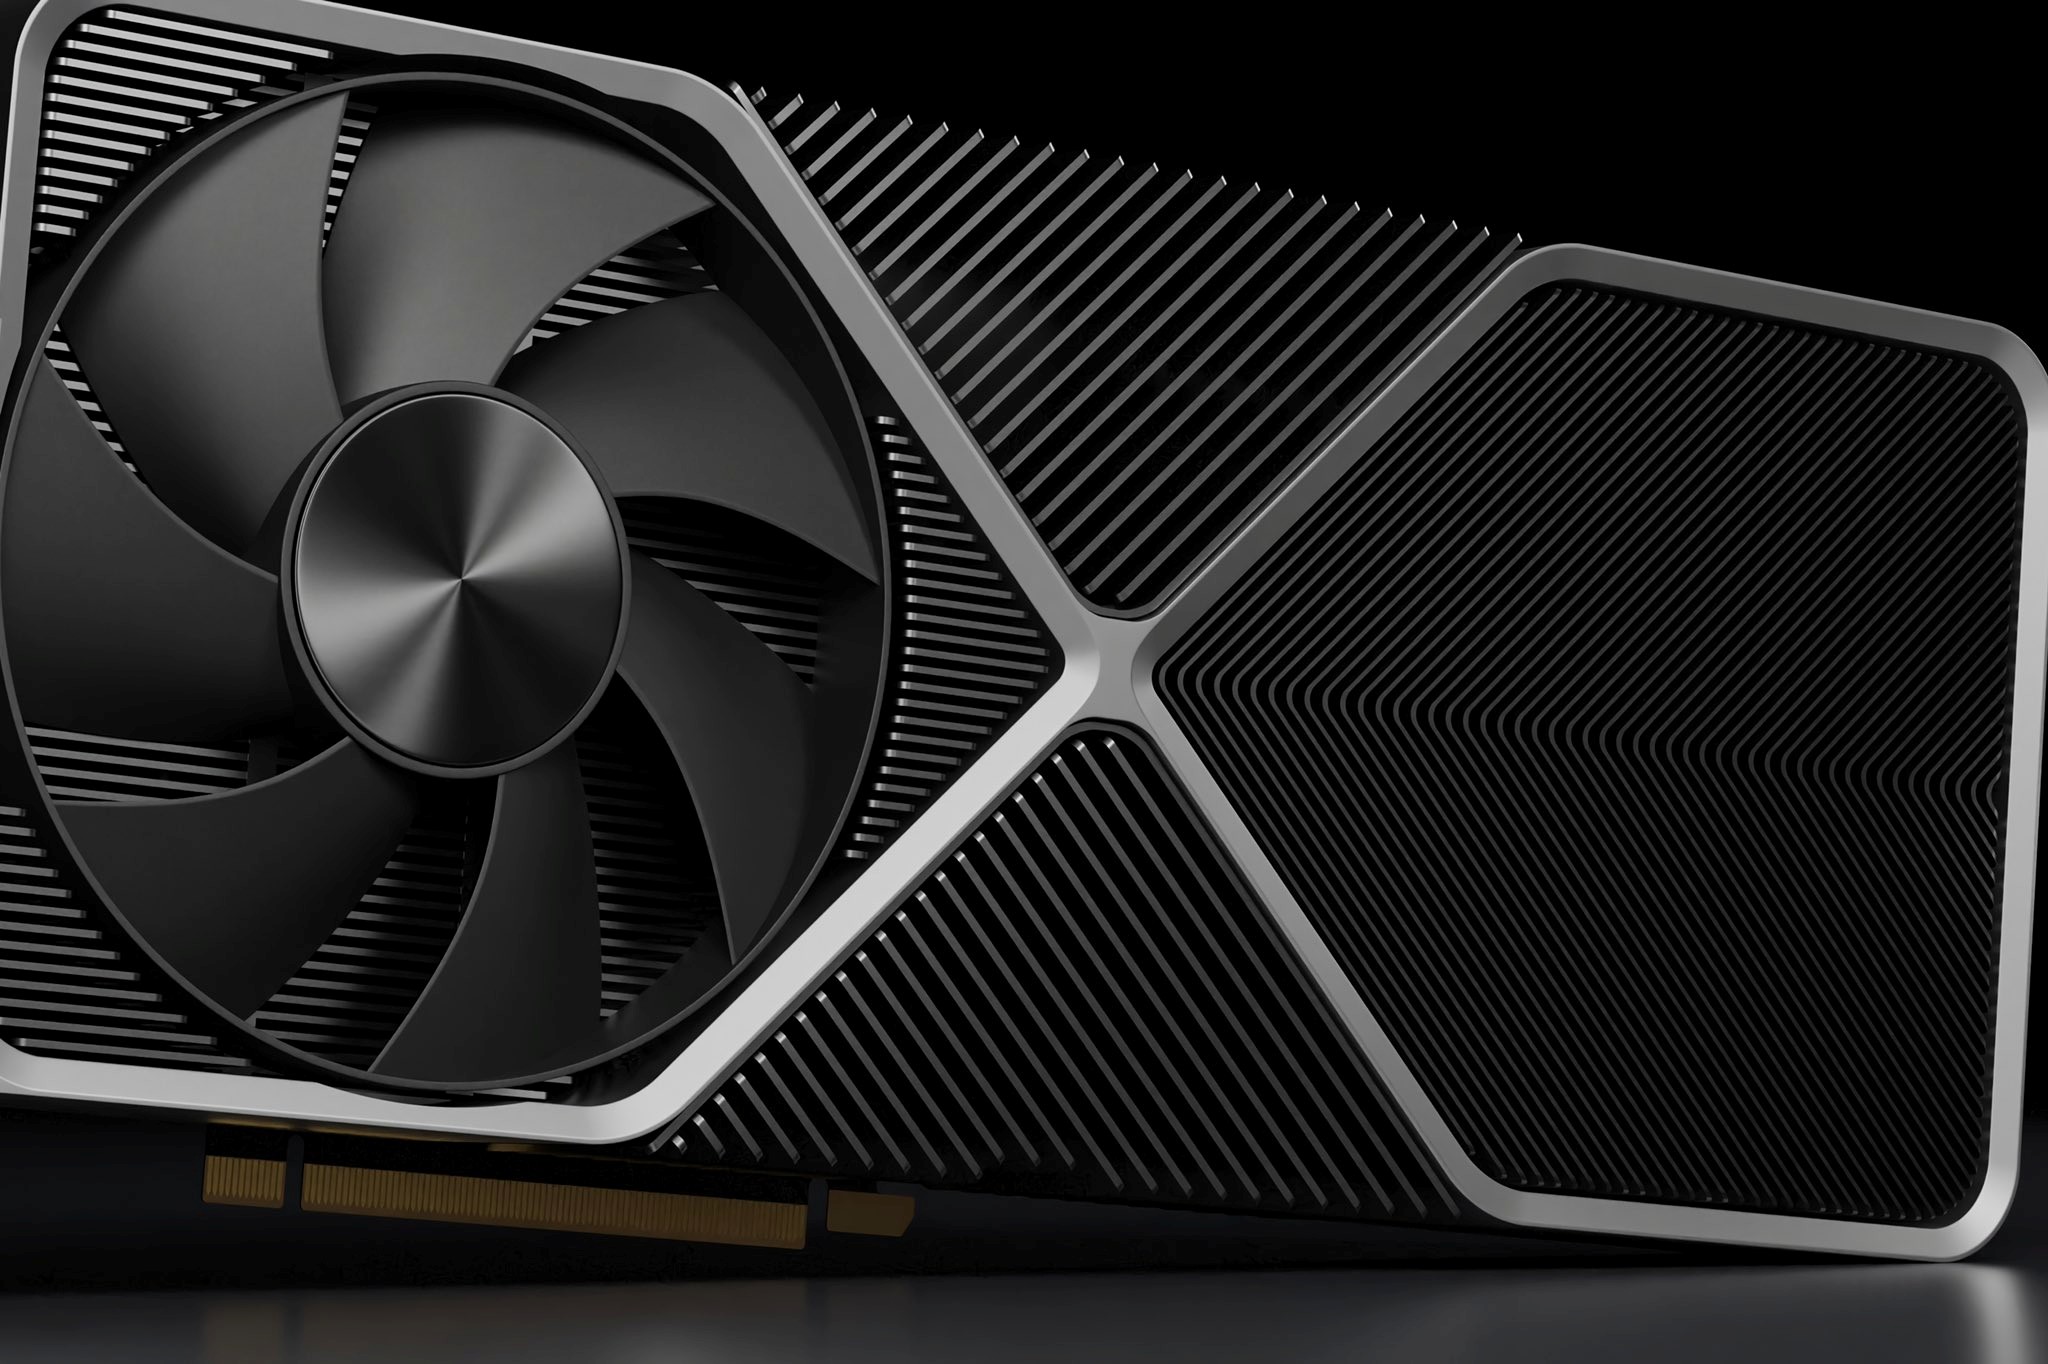 Don't worry RTX 4090 won't cause another GPU shortage